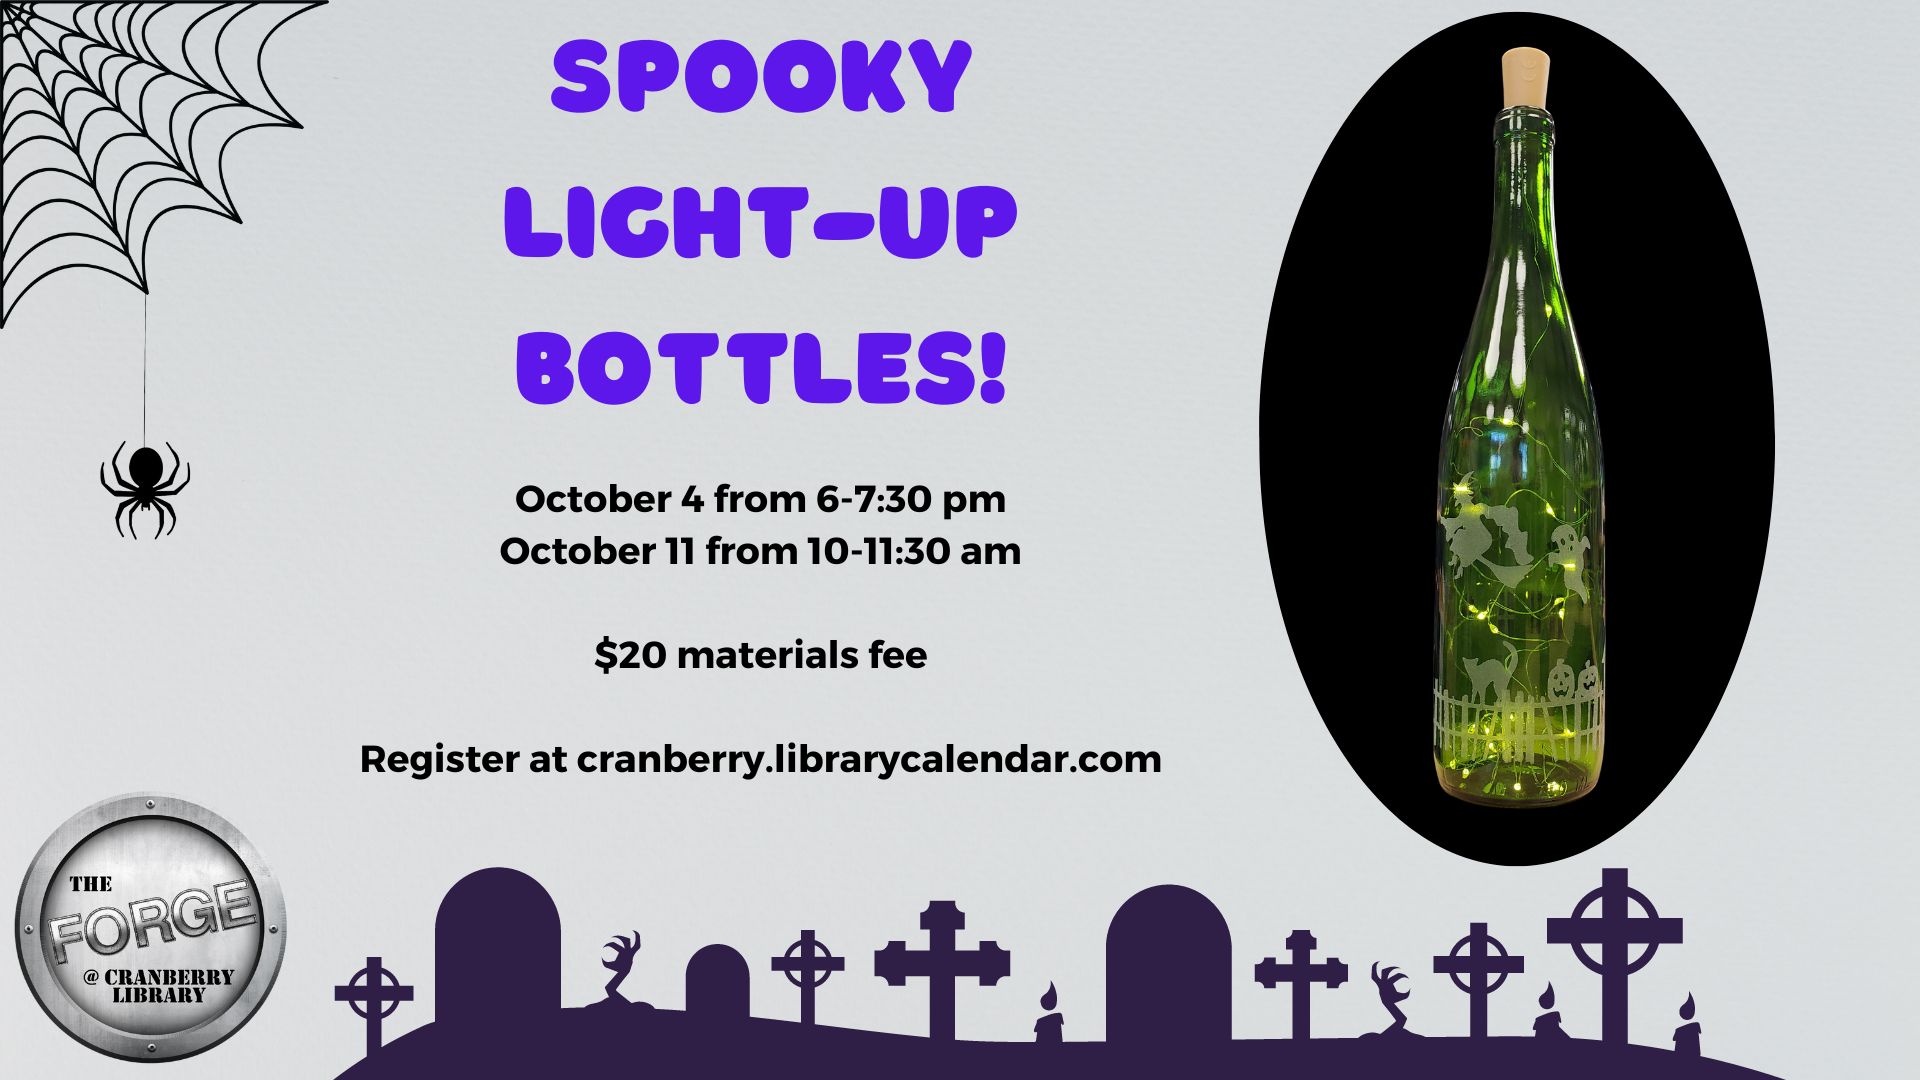 Flyer for Spooky Light-Up Bottles class in The Forge